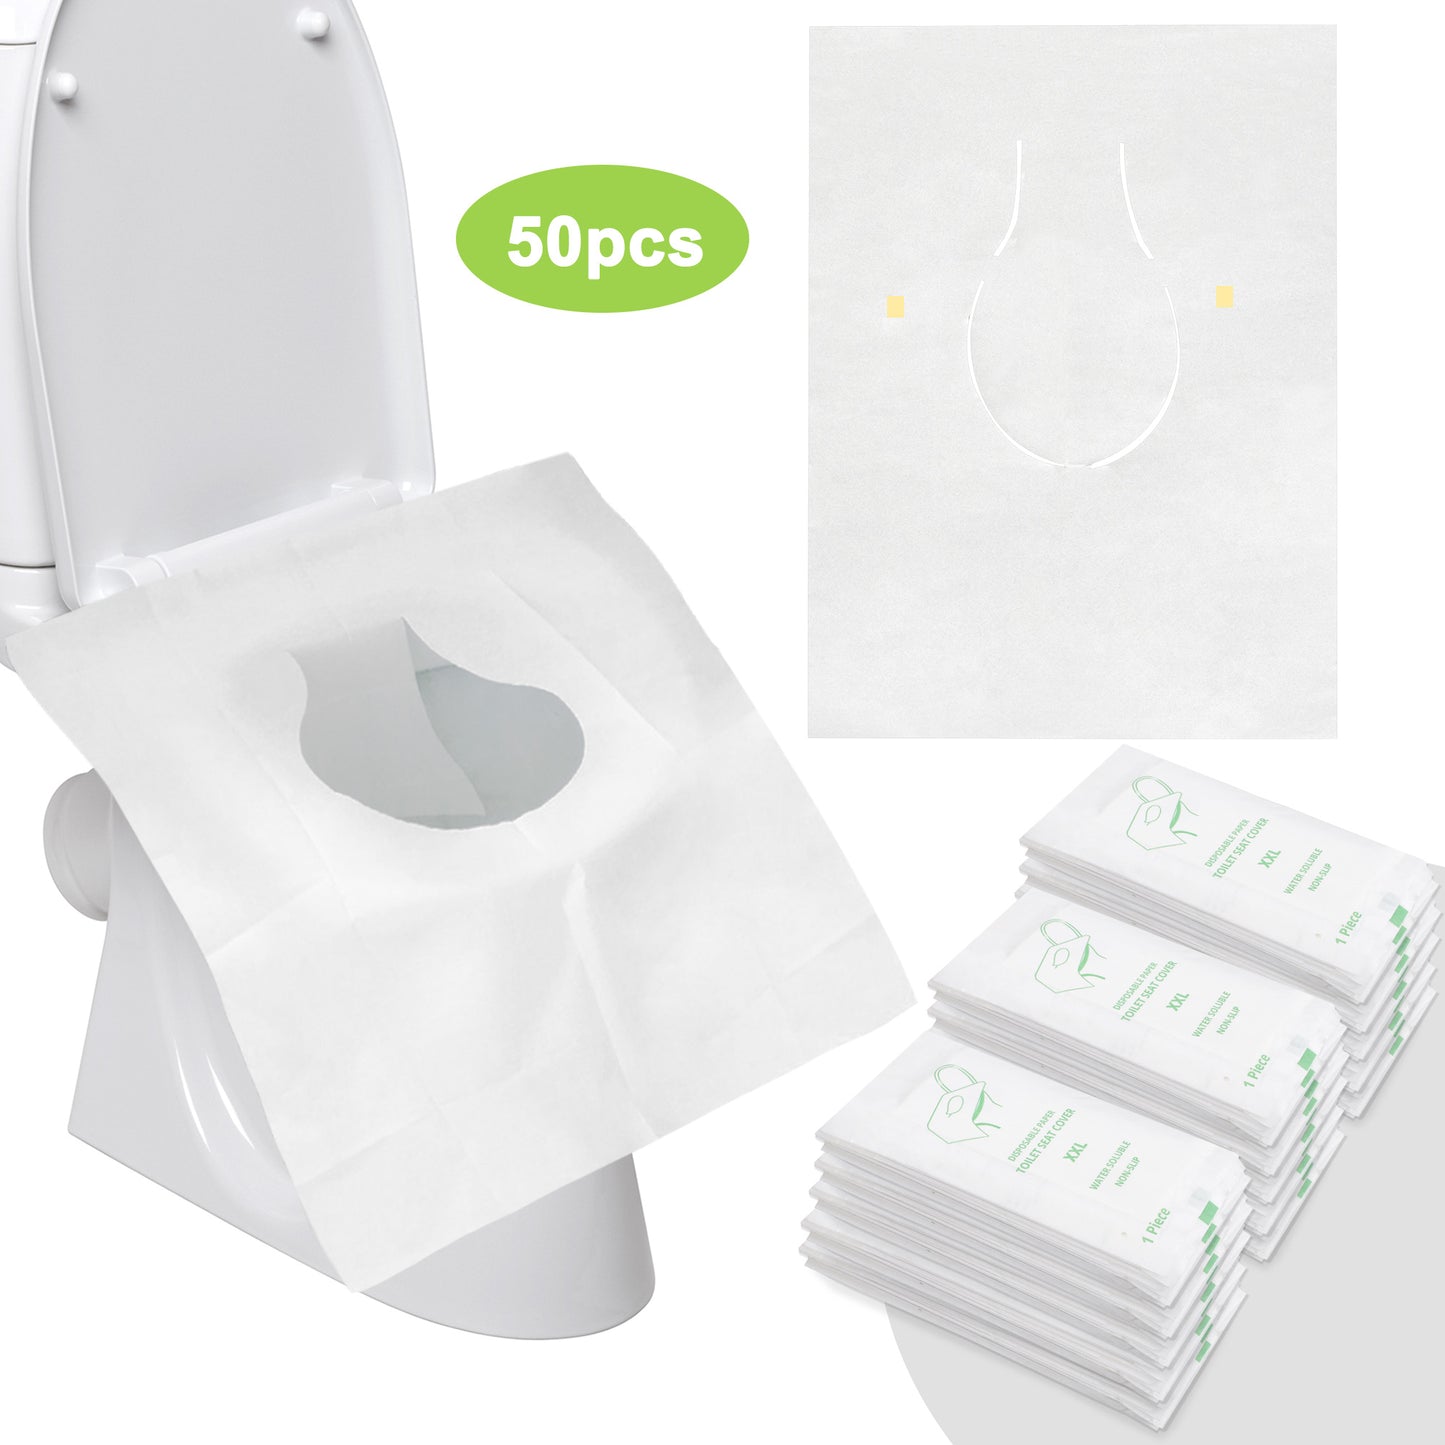 Disposable Toilet Seat Covers - Hygienic Protection, Travel-Friendly